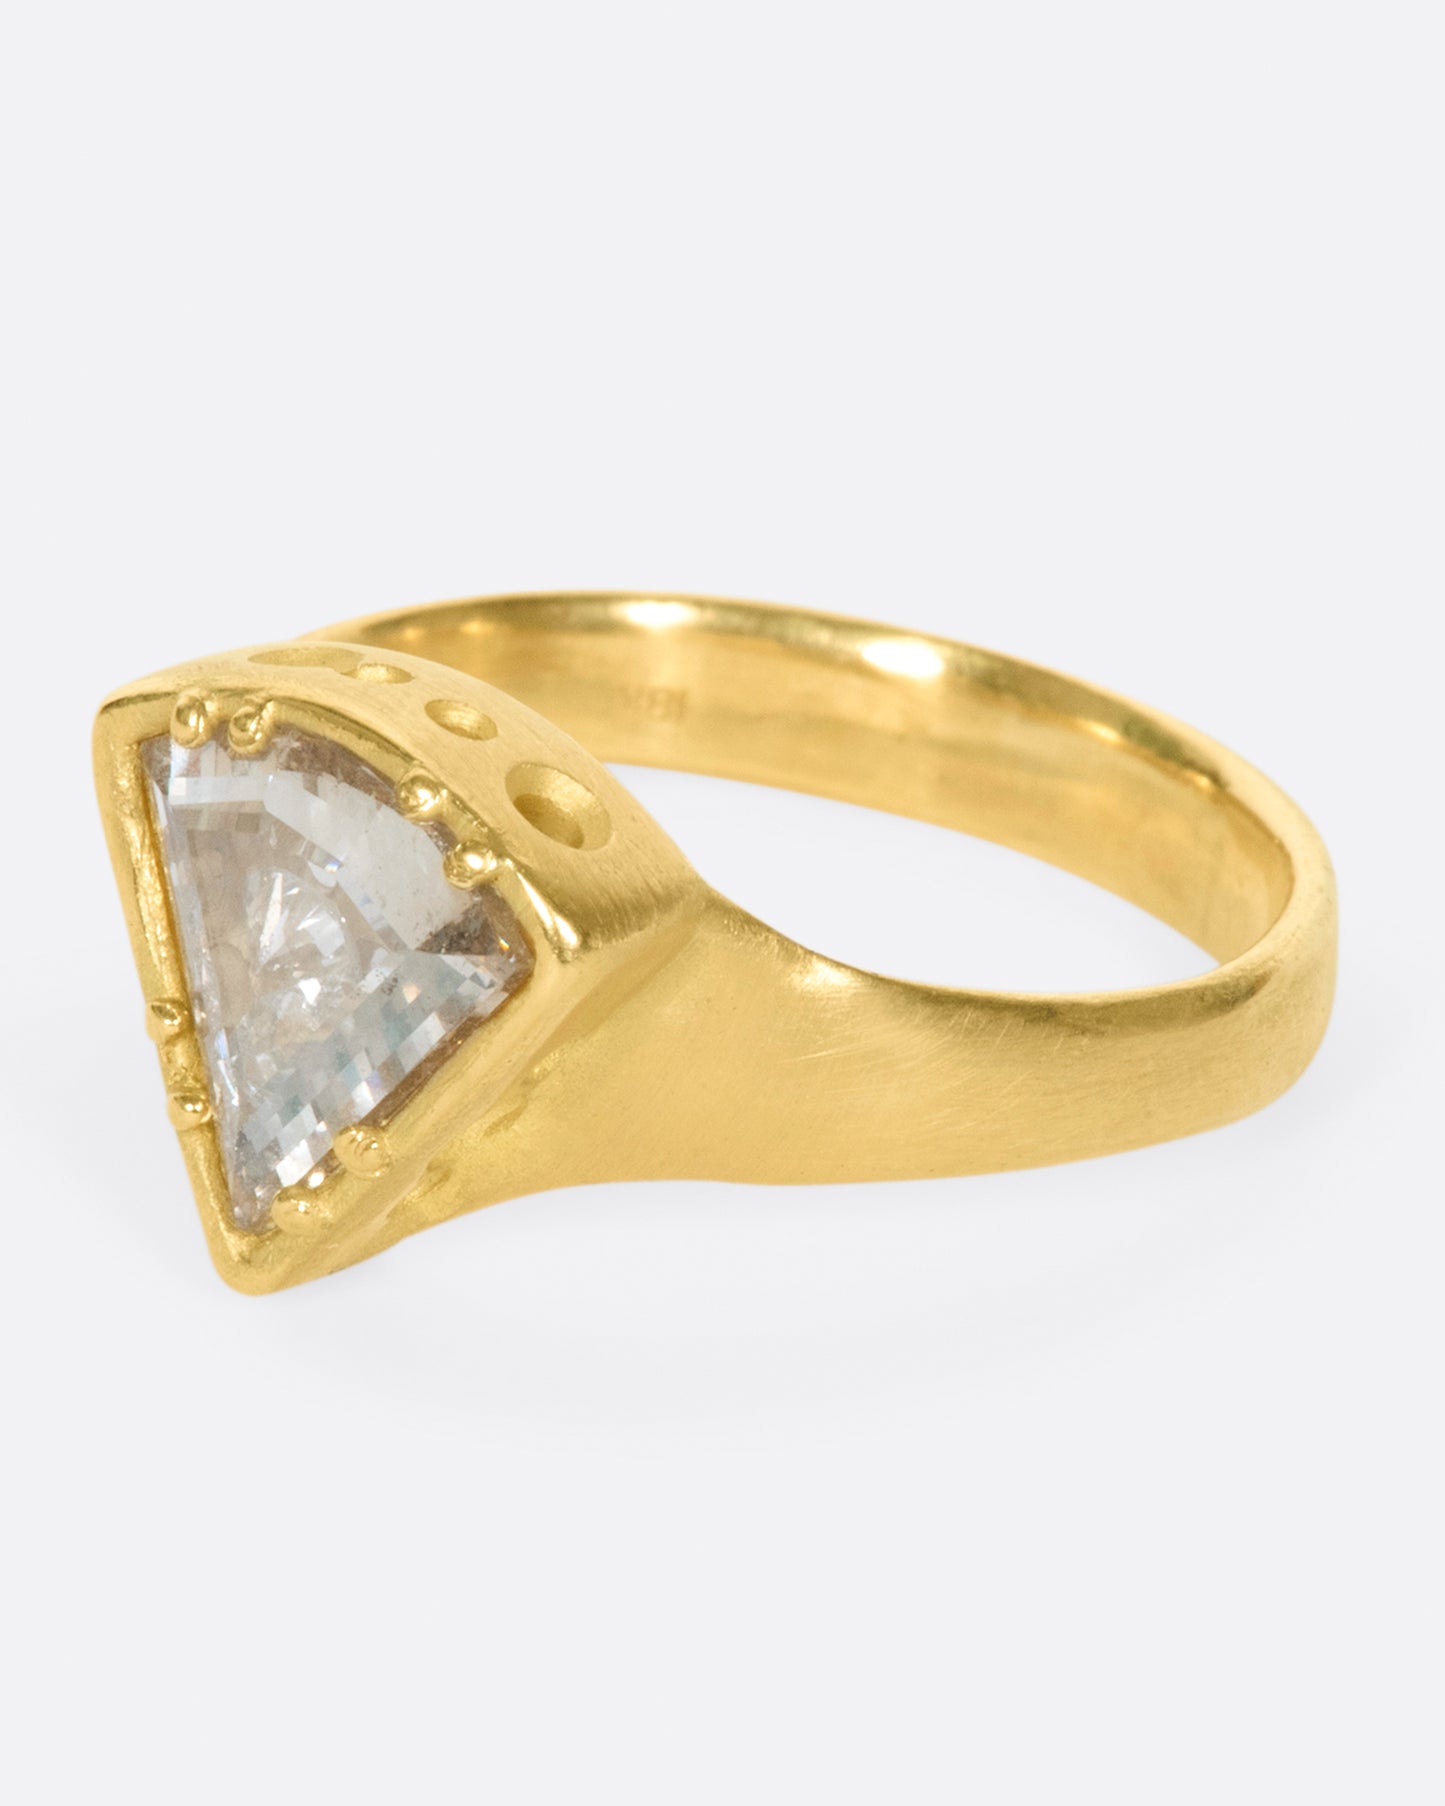 A shaker ring with a white diamond slice enveloping a cache of tiny diamonds